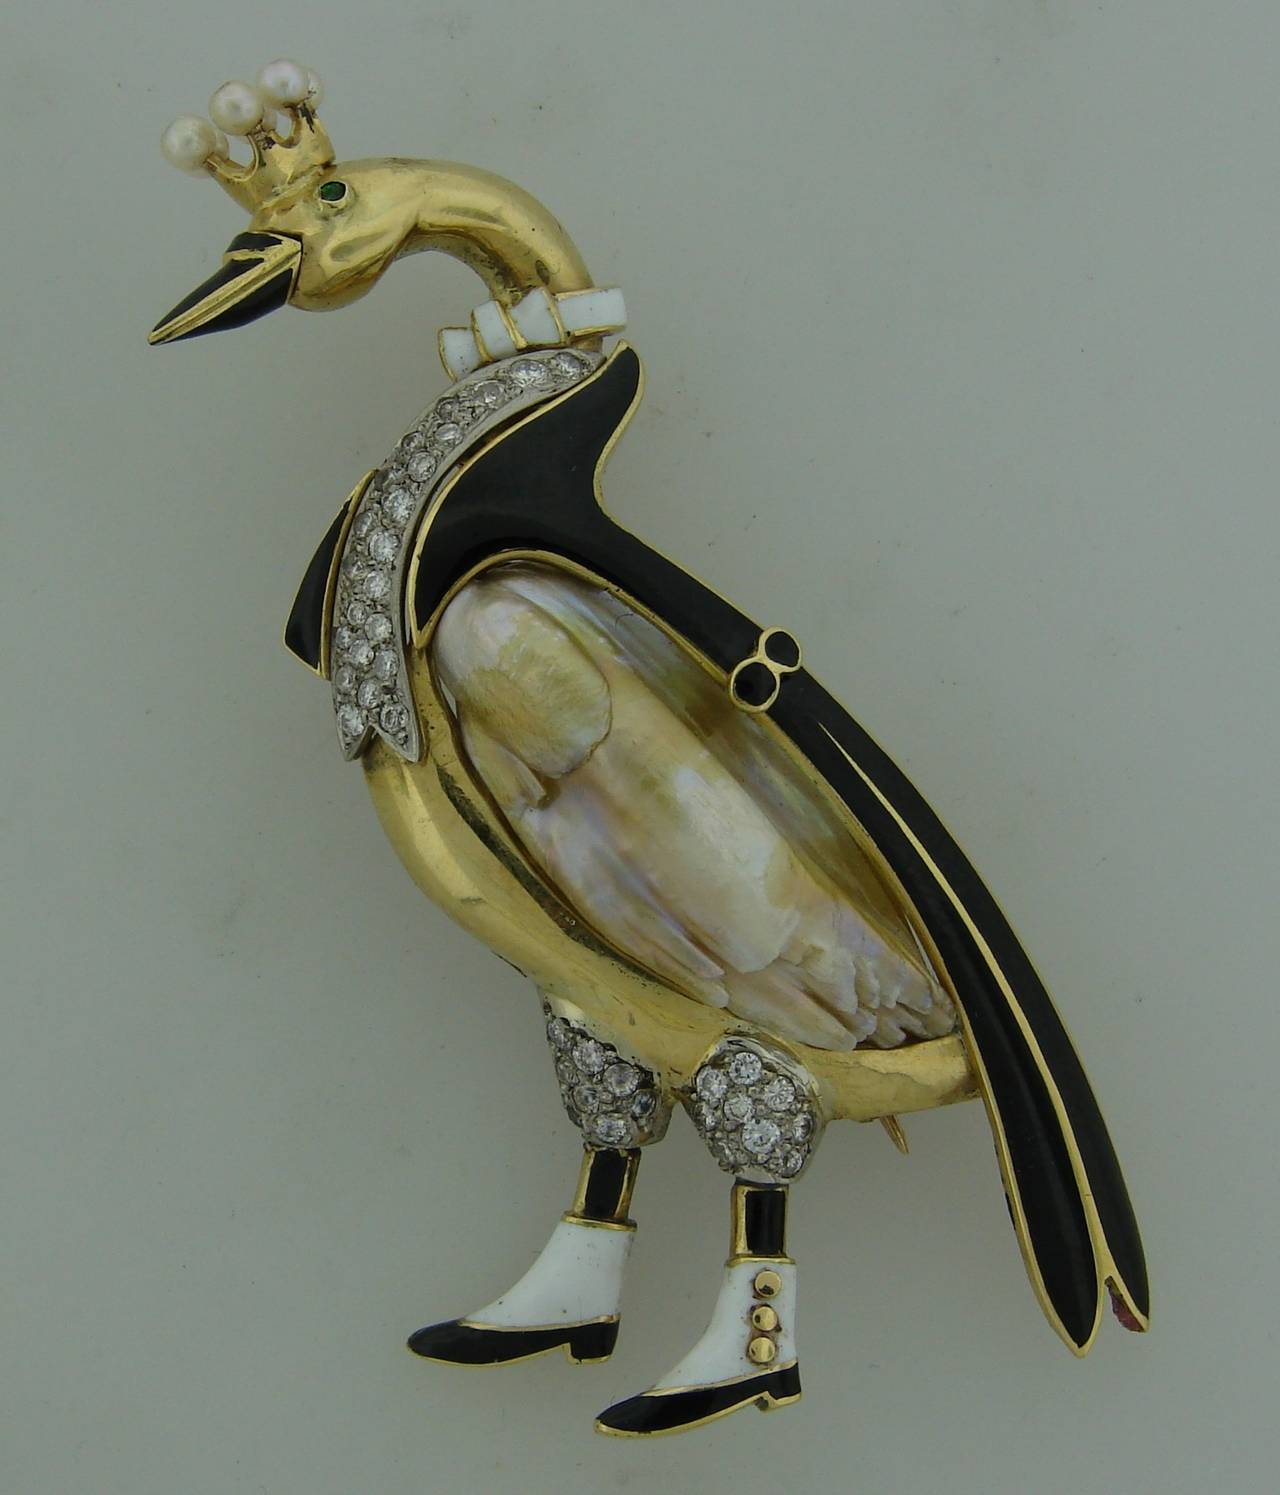 Adorable swan brooch created by J.E. Caldwell in the 1950's! Features an amazing 15.56-ct baroque natural freshwater pearl that eventually inspired the designer to make this brooch. 
The piece is made of 18k (tested) yellow gold and black & white